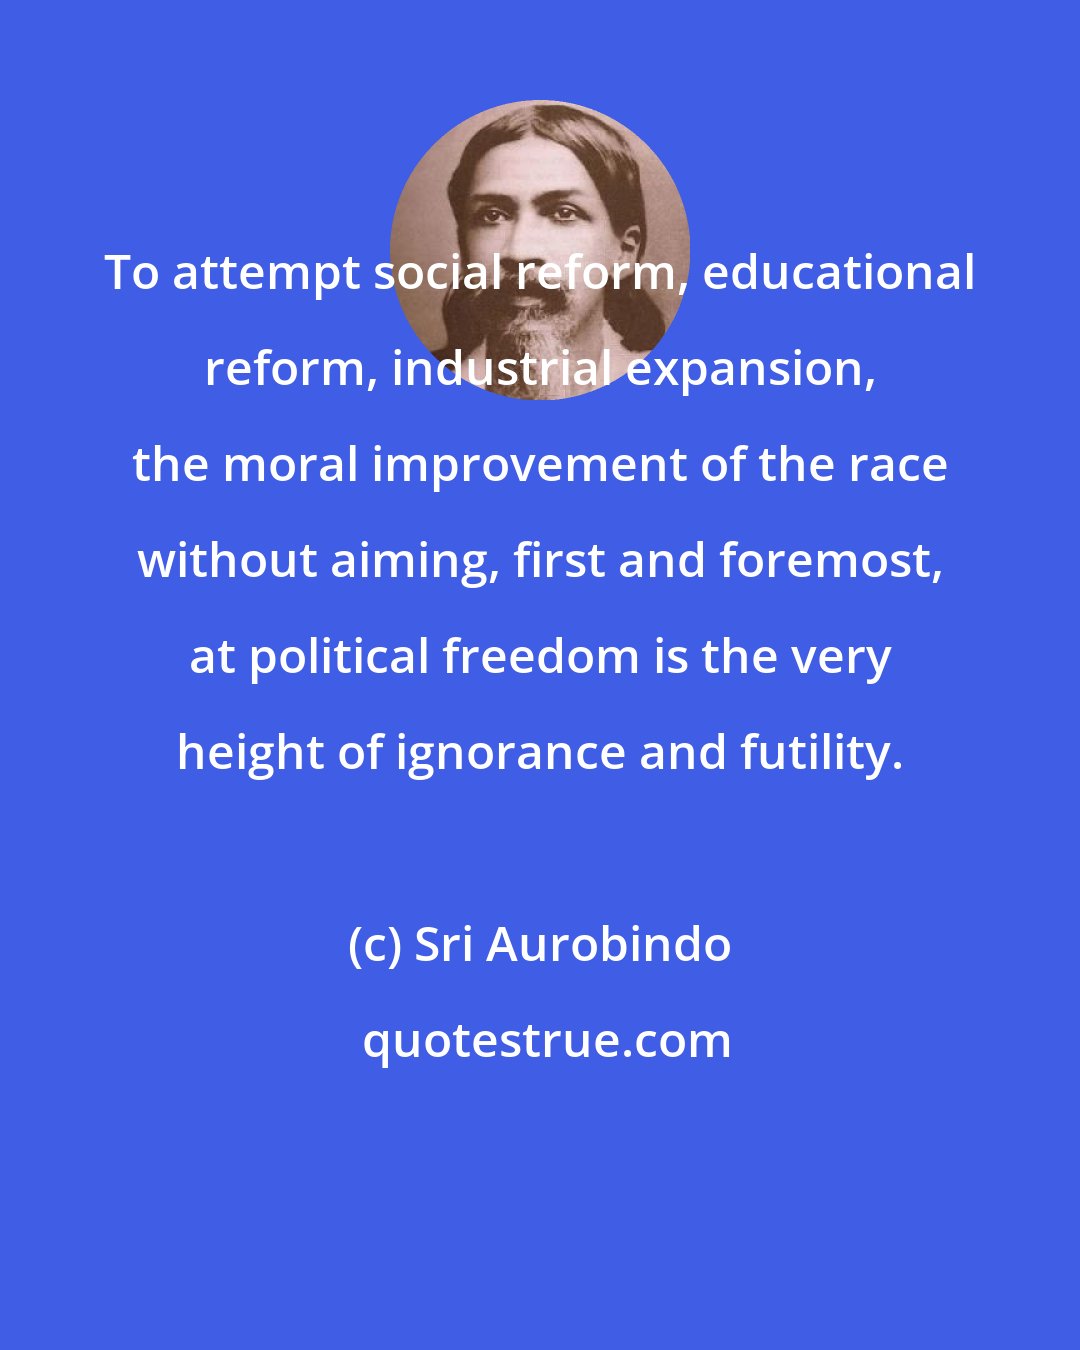 Sri Aurobindo: To attempt social reform, educational reform, industrial expansion, the moral improvement of the race without aiming, first and foremost, at political freedom is the very height of ignorance and futility.